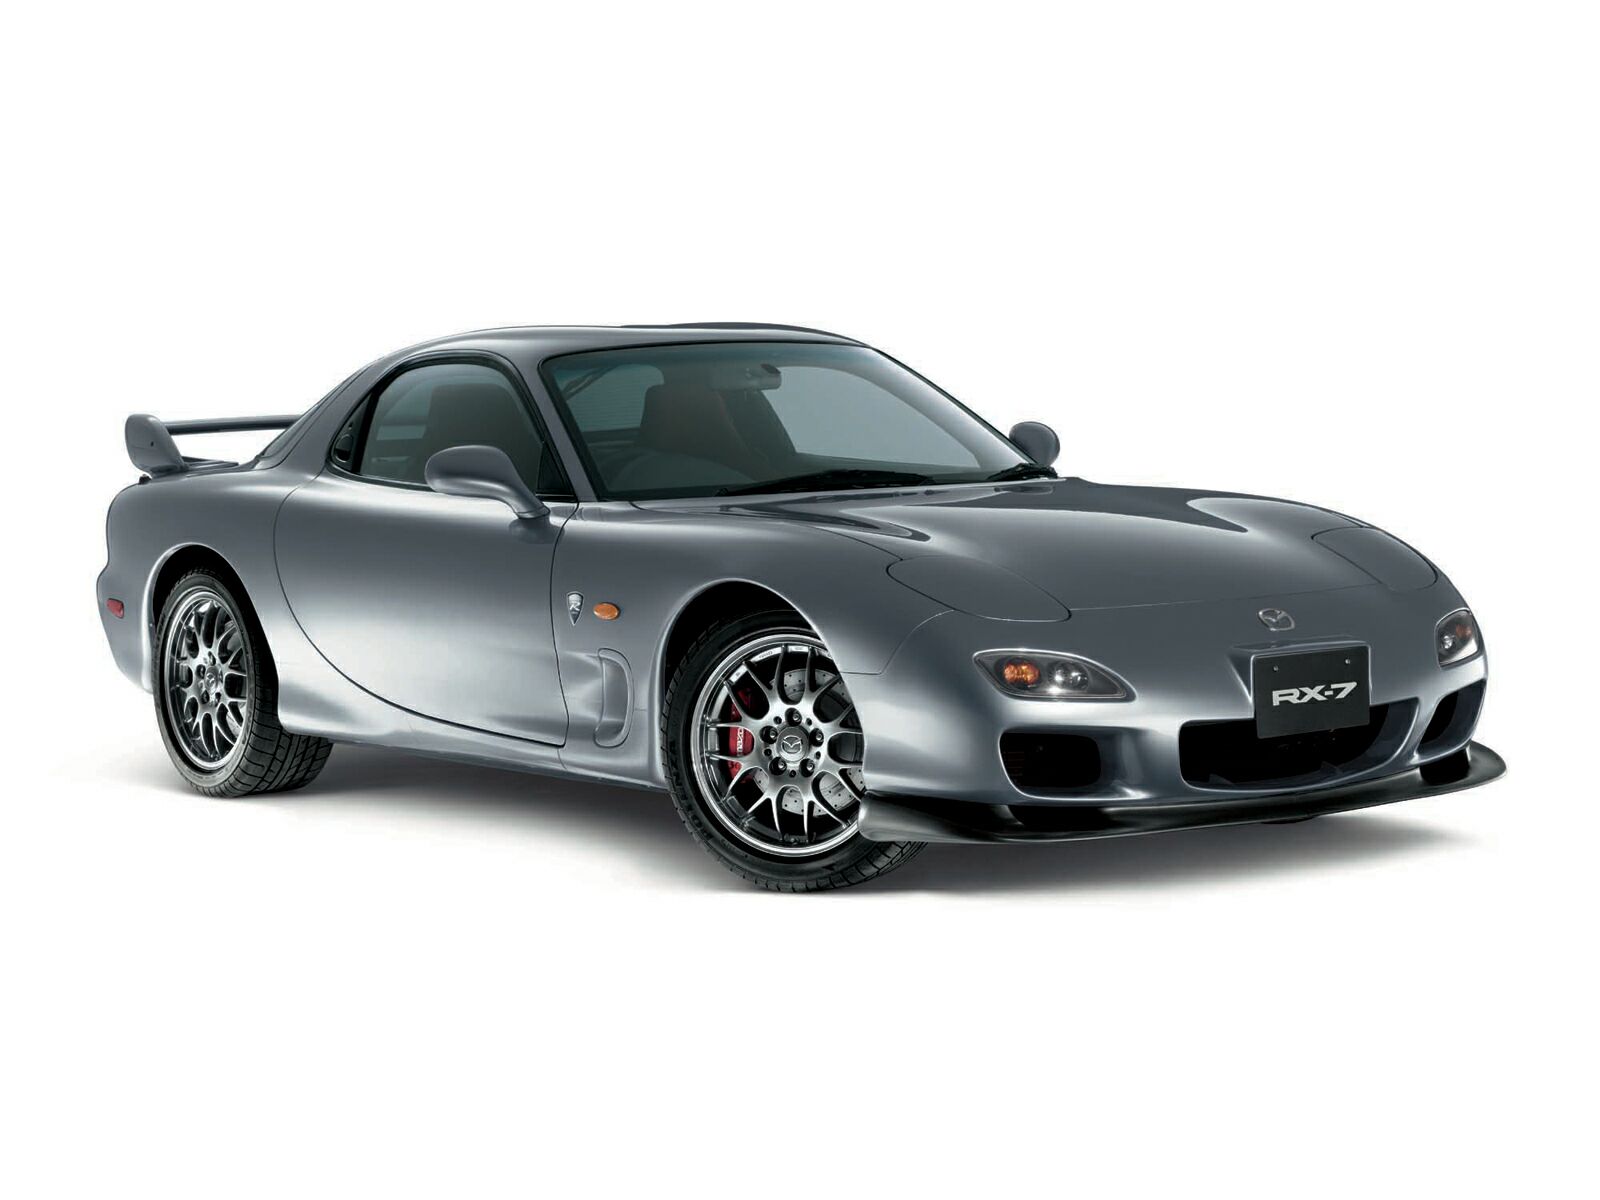 You can vote for this Mazda RX-7 photo